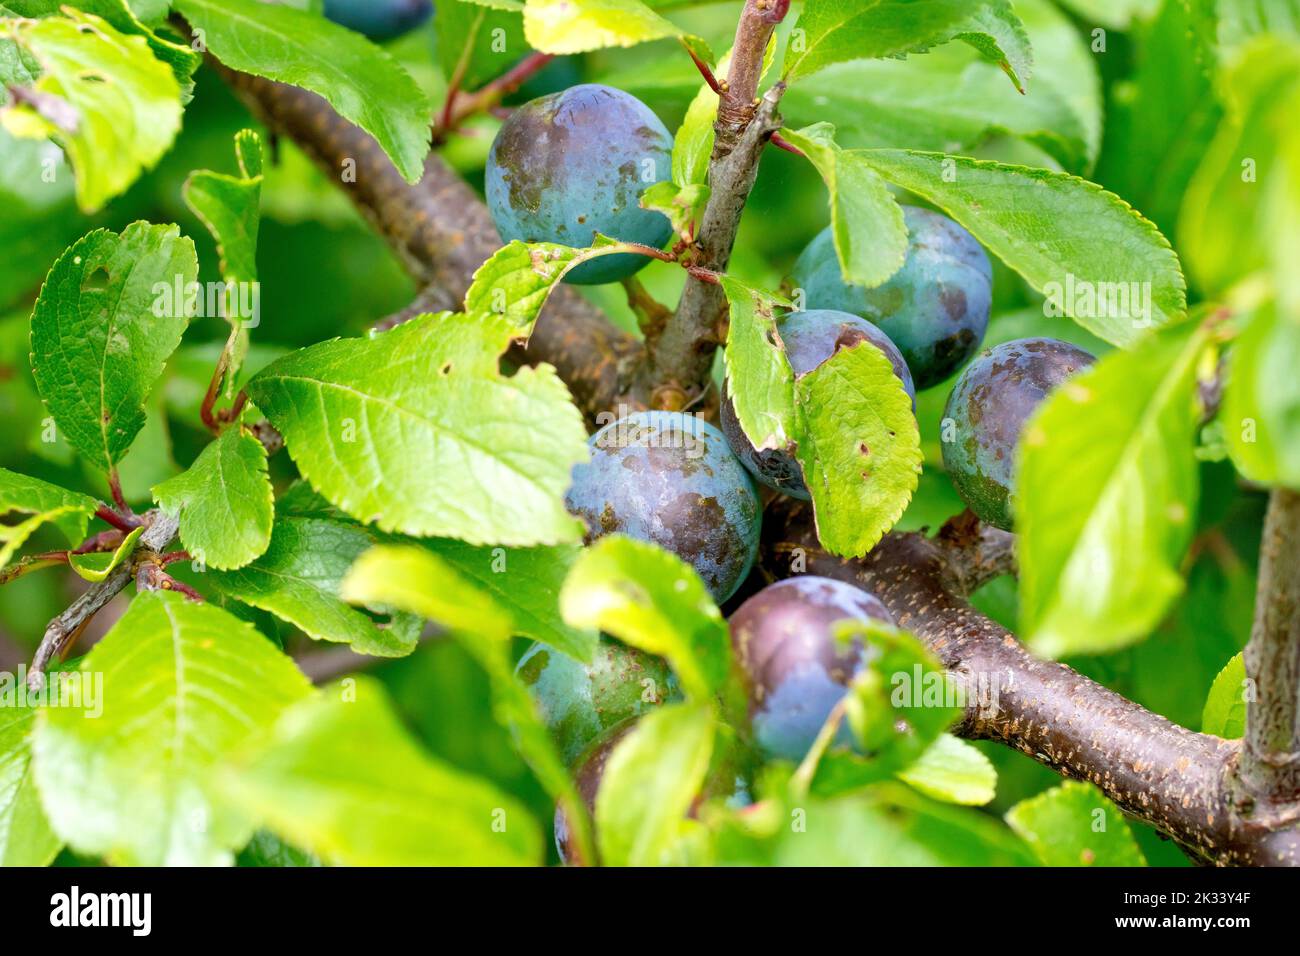 Sloe or Blackthorn (prunus spinosa), close up of the blue berries, fruits, or sloes of the shrub hiding amongst the leaves. Stock Photo